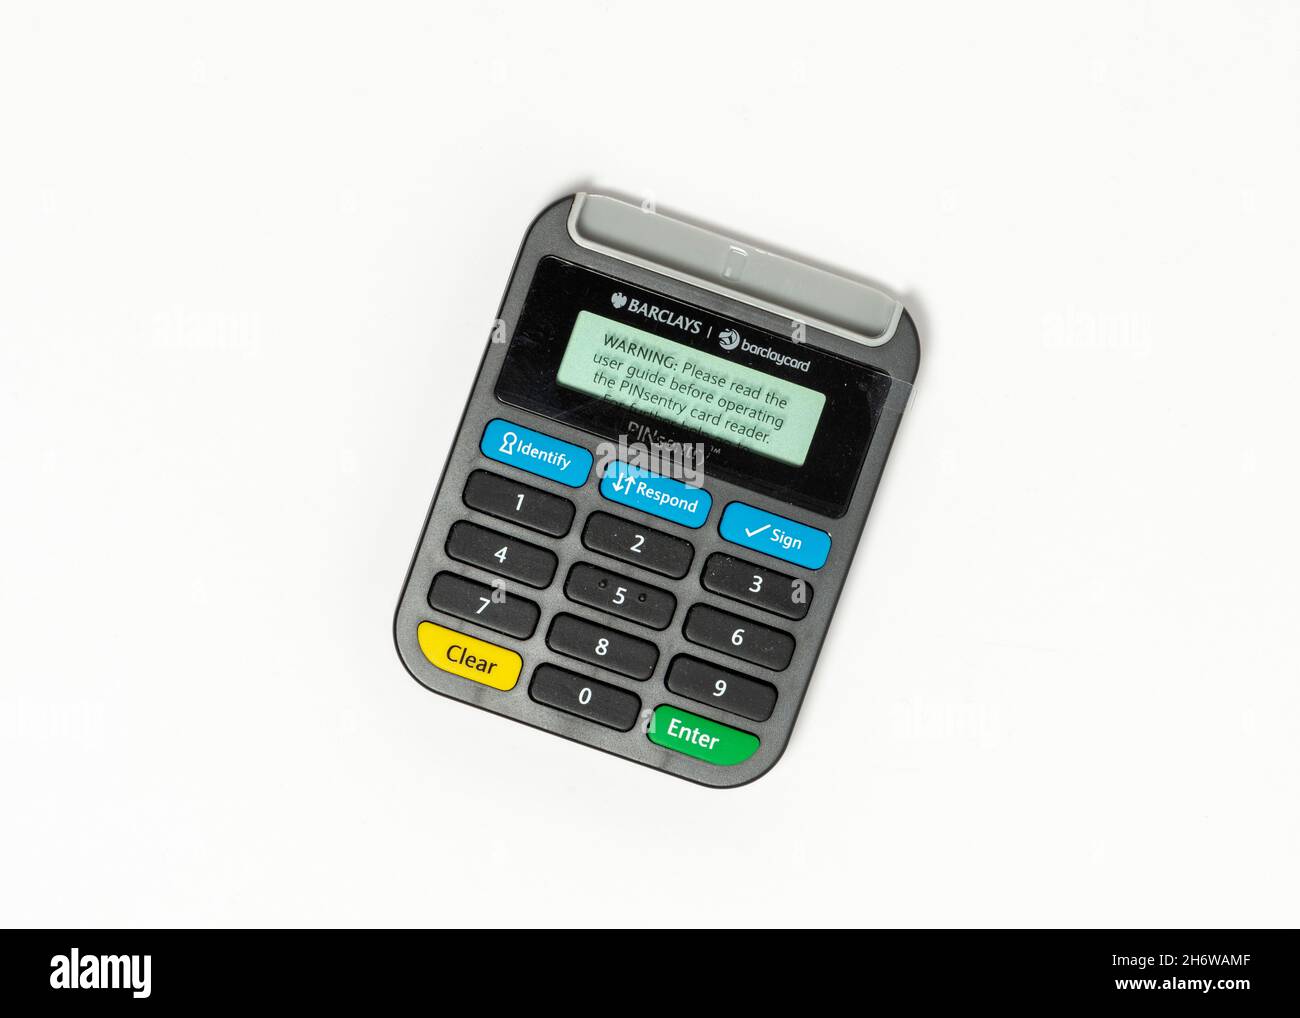 New Pinsentry card reader device by Barclays Bank Stock Photo